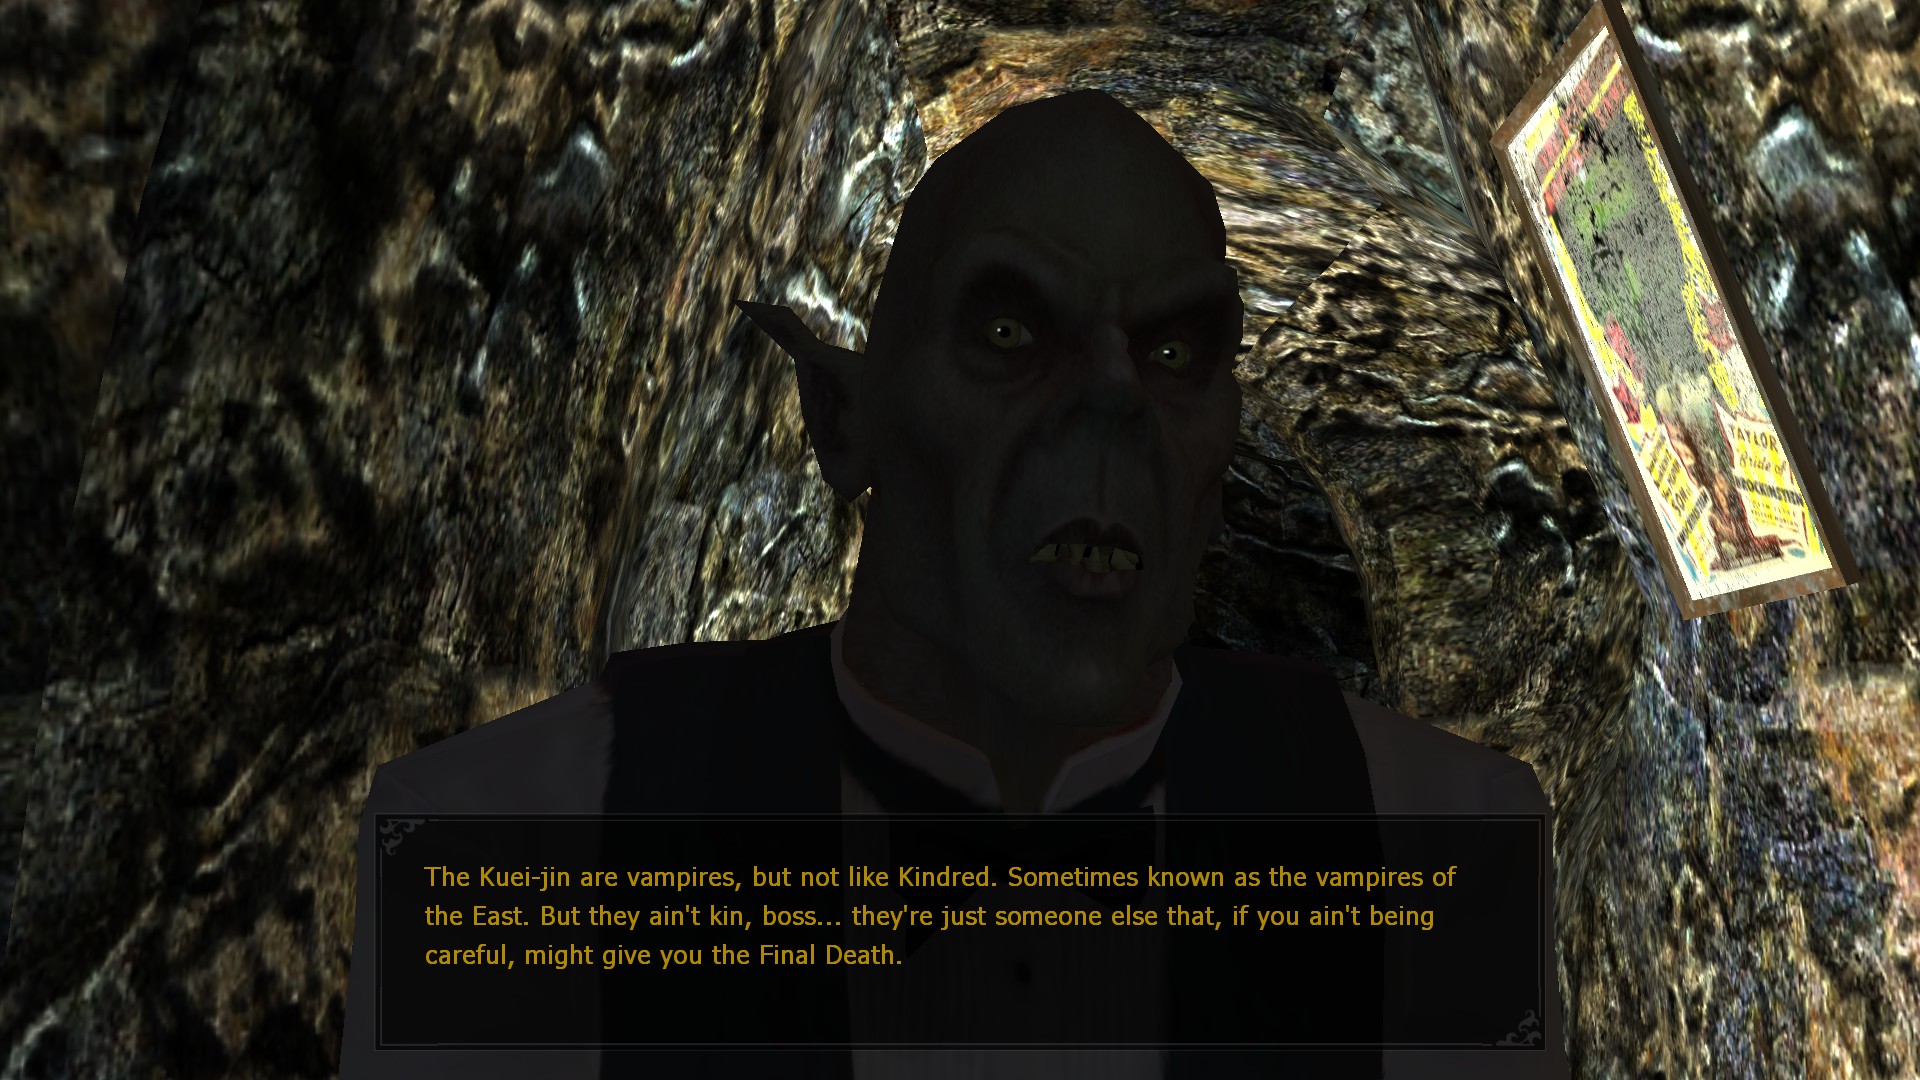 Screenshot from Bloodlines. A Nosferatu in shadow tells us about the 'vampires of the east'